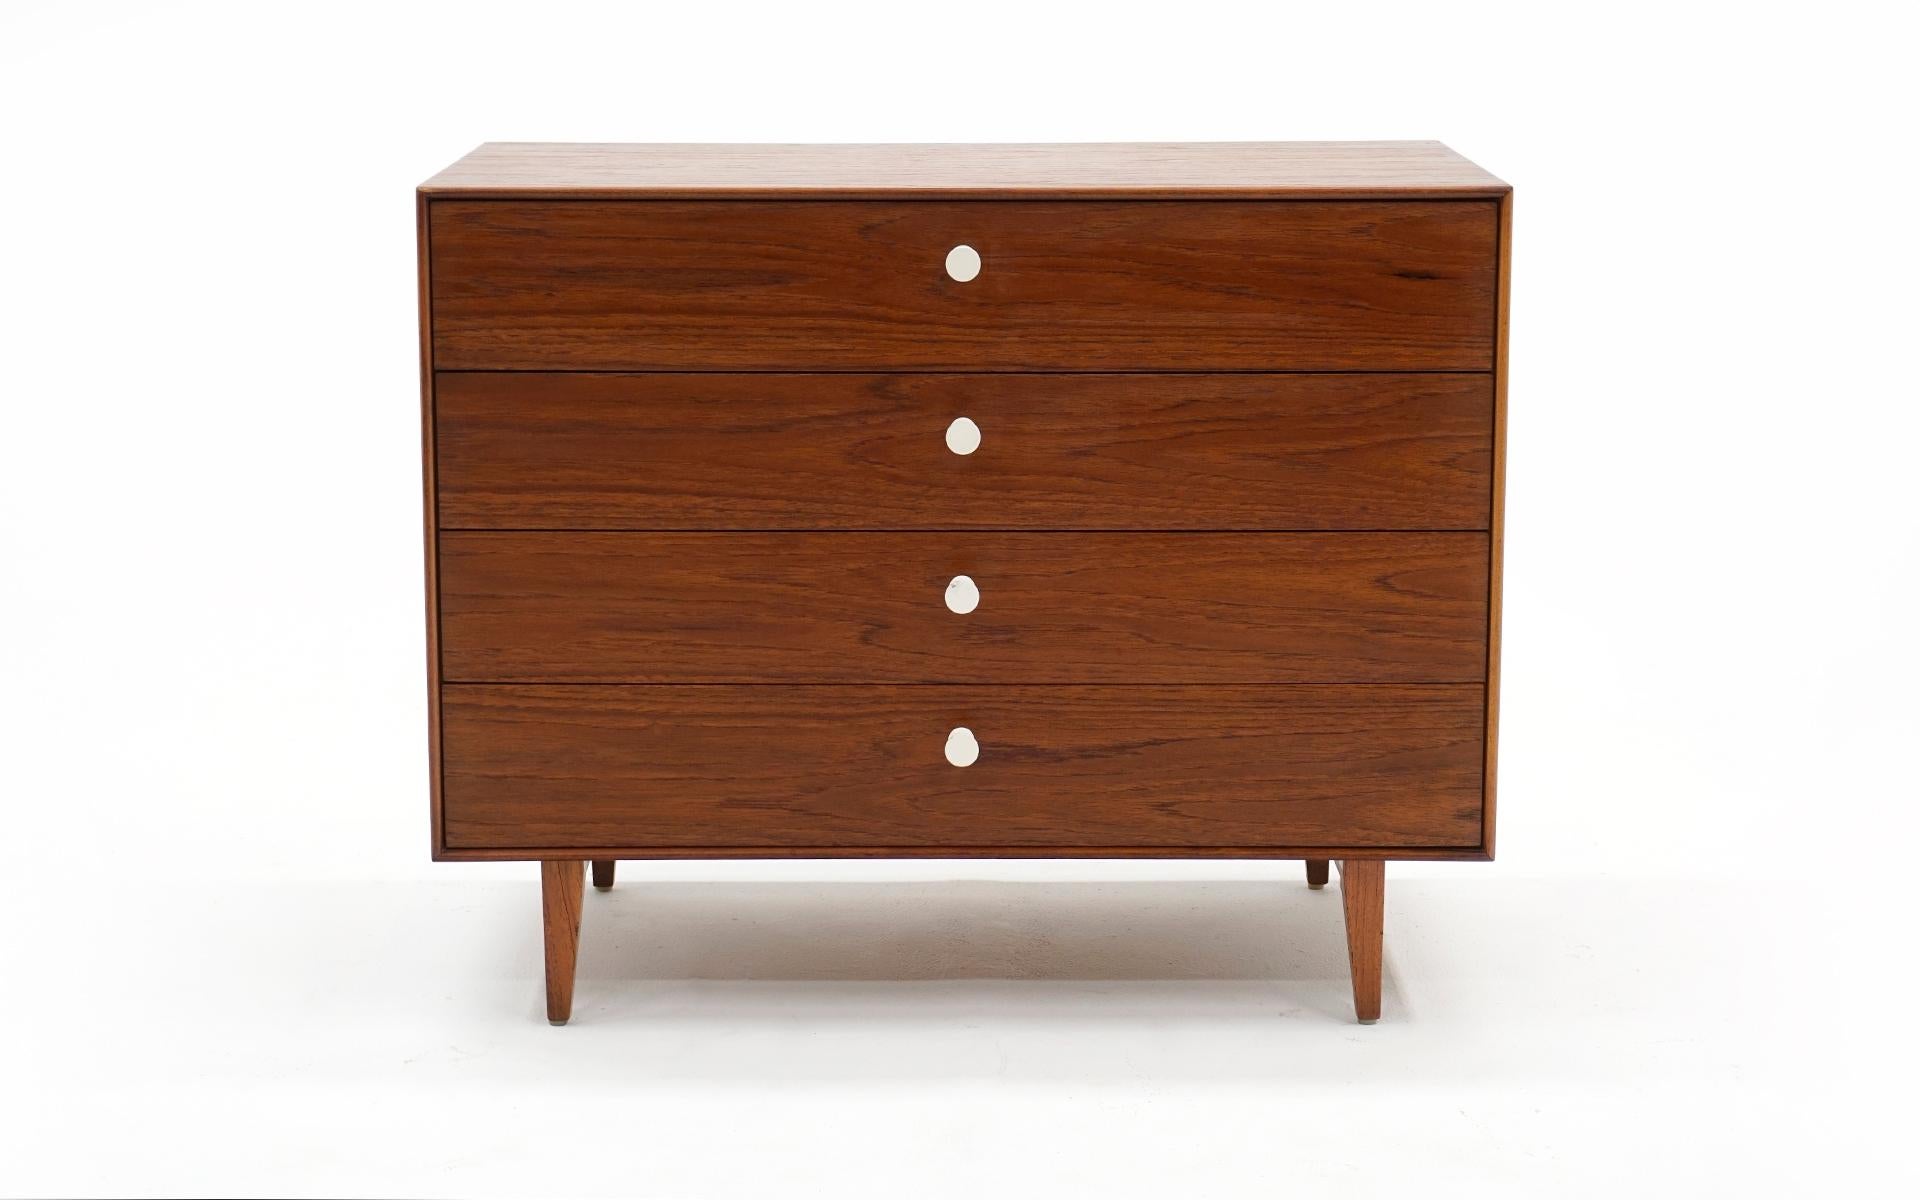 George Nelson Thin Edge cabinet in Brazilian Rosewood, manufactured by Herman Miller. Signed with the early round Herman Miller medallion. Very good original condition. Very few signs of use. As seen in the photos the top back corner has a round